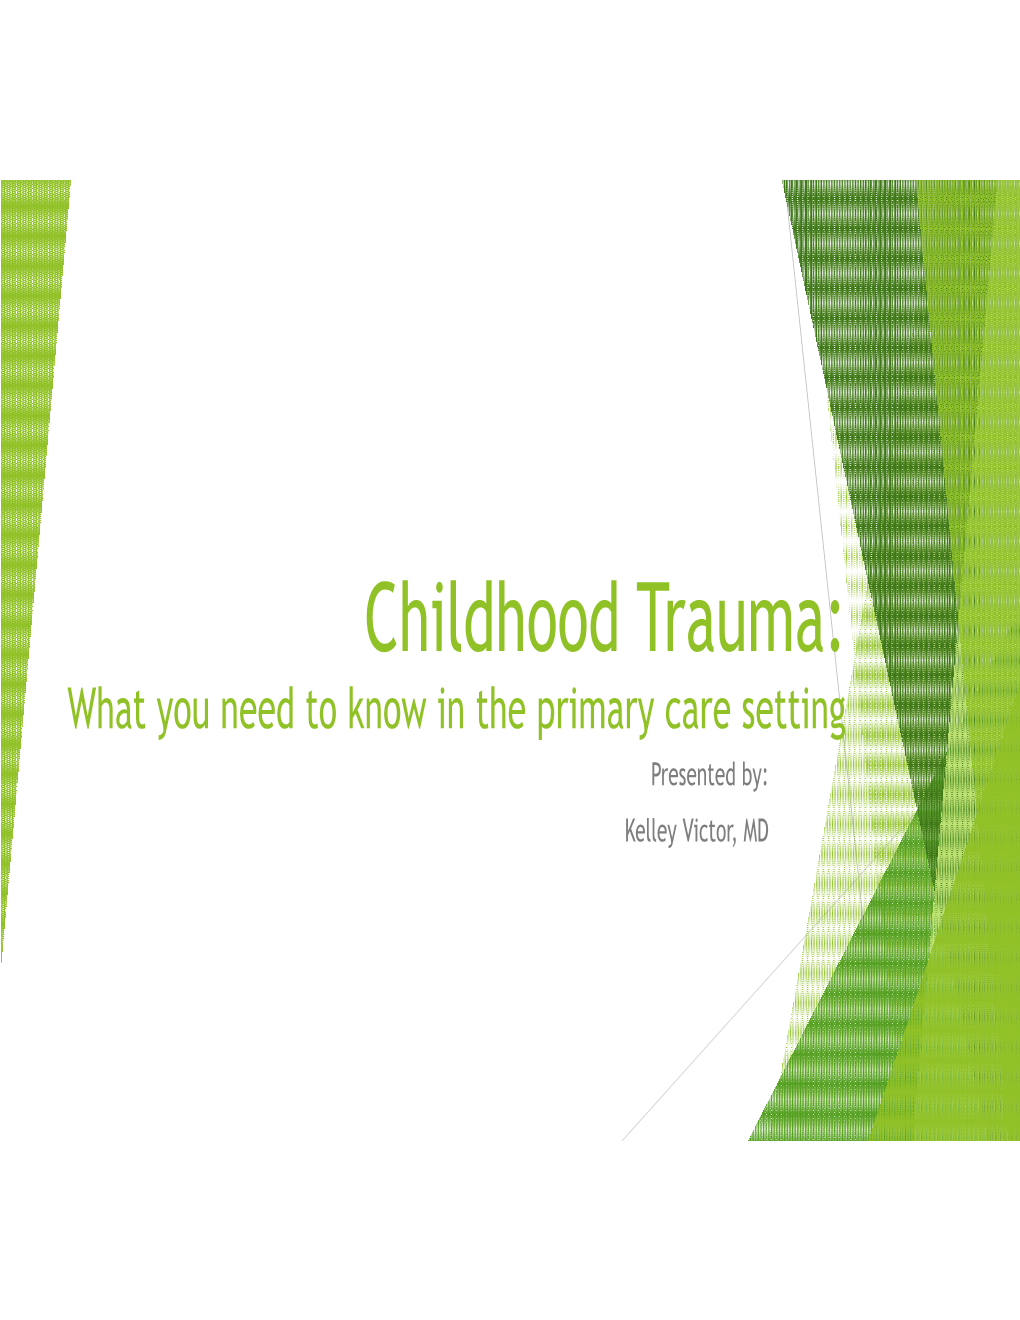 Childhood Trauma: What You Need to Know in the Primary Care Setting Presented By: Kelley Victor, MD Objectives